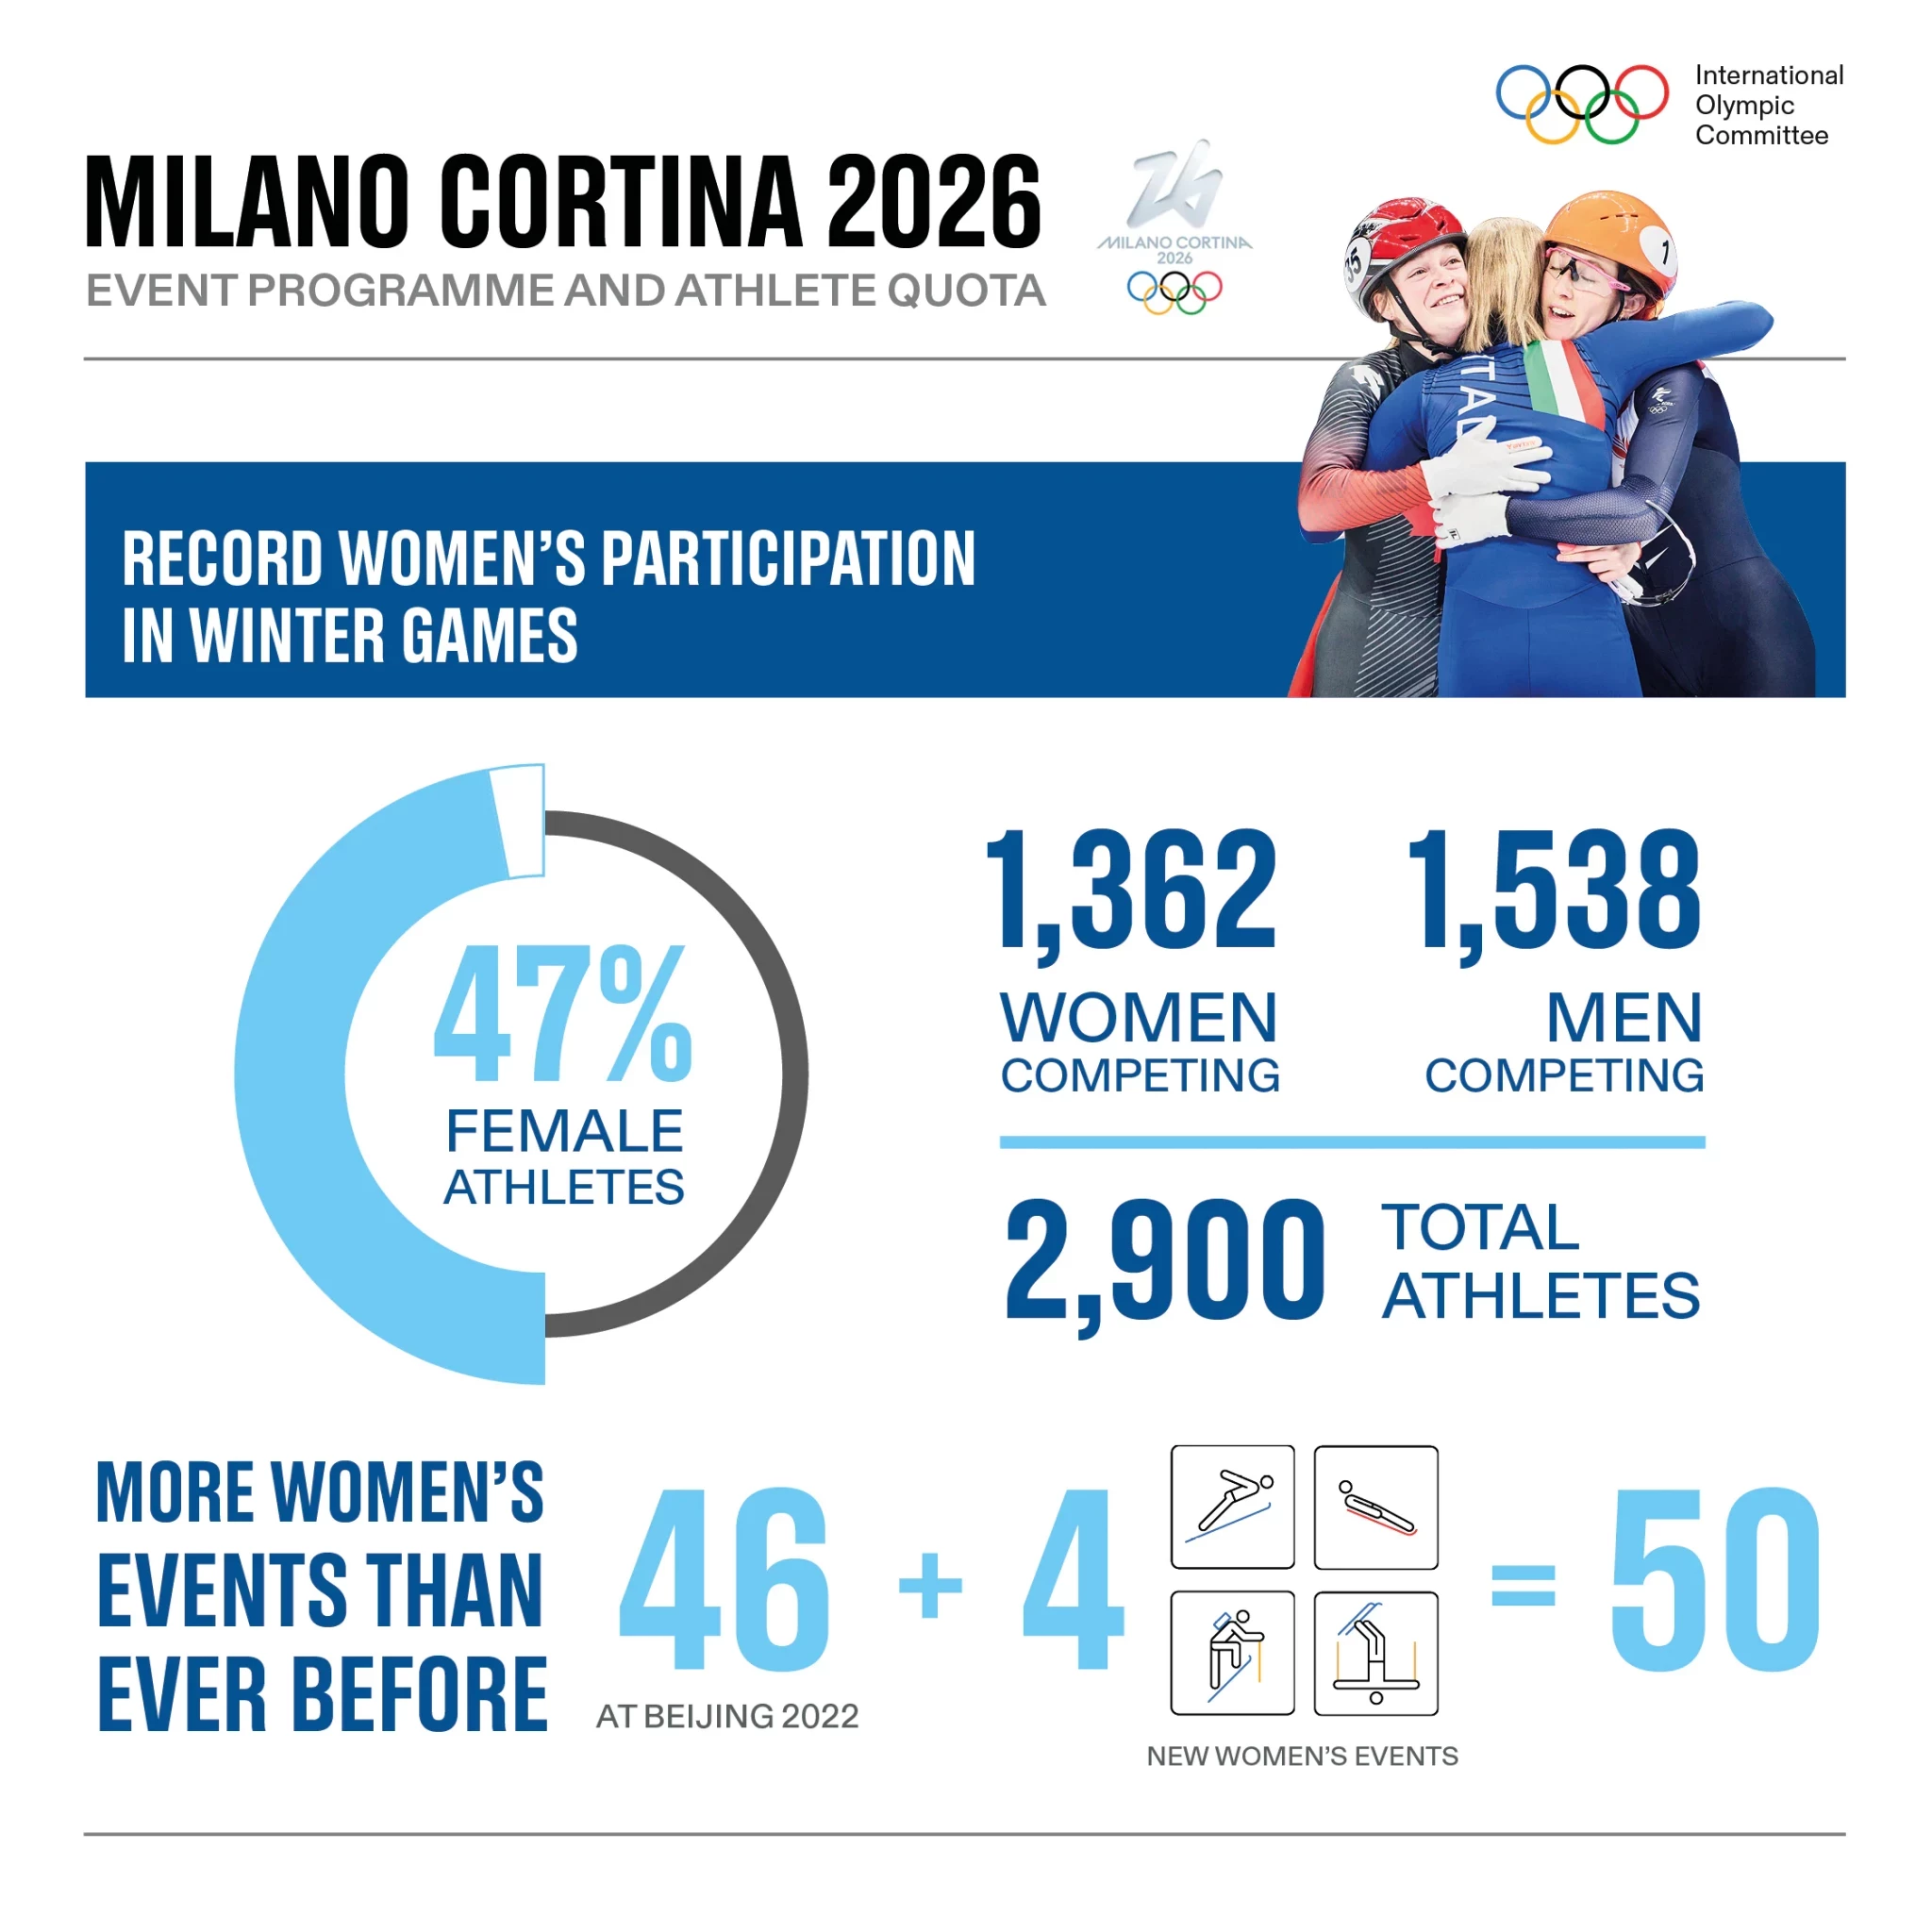 Women are set to make up a record 47 per cent of the athletes at Milan Cortina 2026 ©IOC